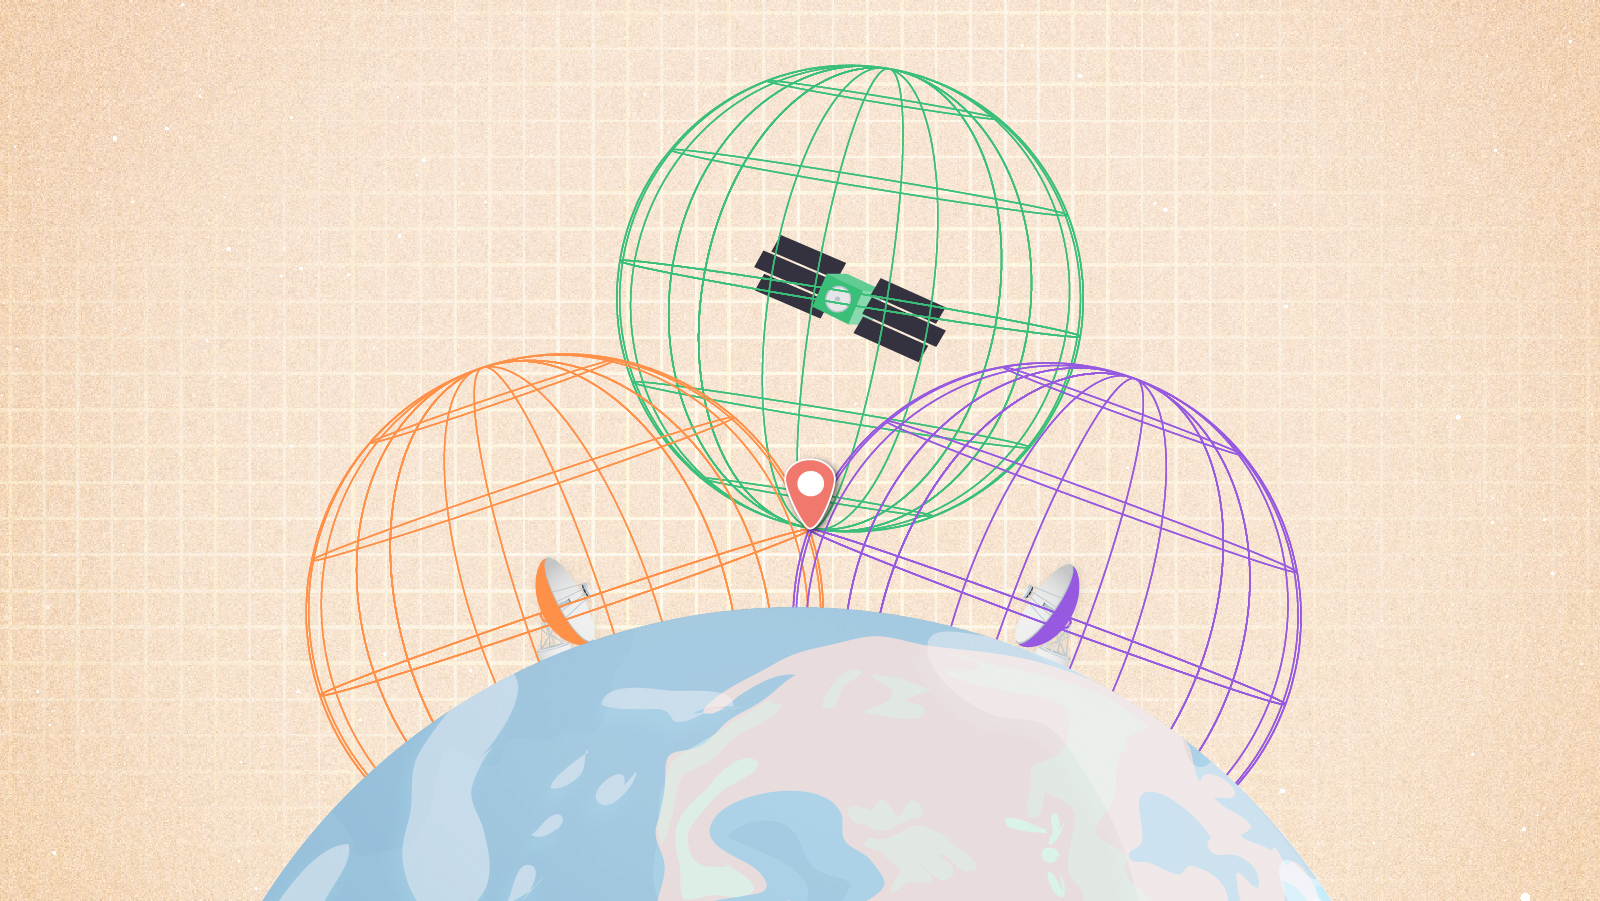 Spheres extending from two antennas on Earth and a satellite above Earth intersect at a point marked with a flag.